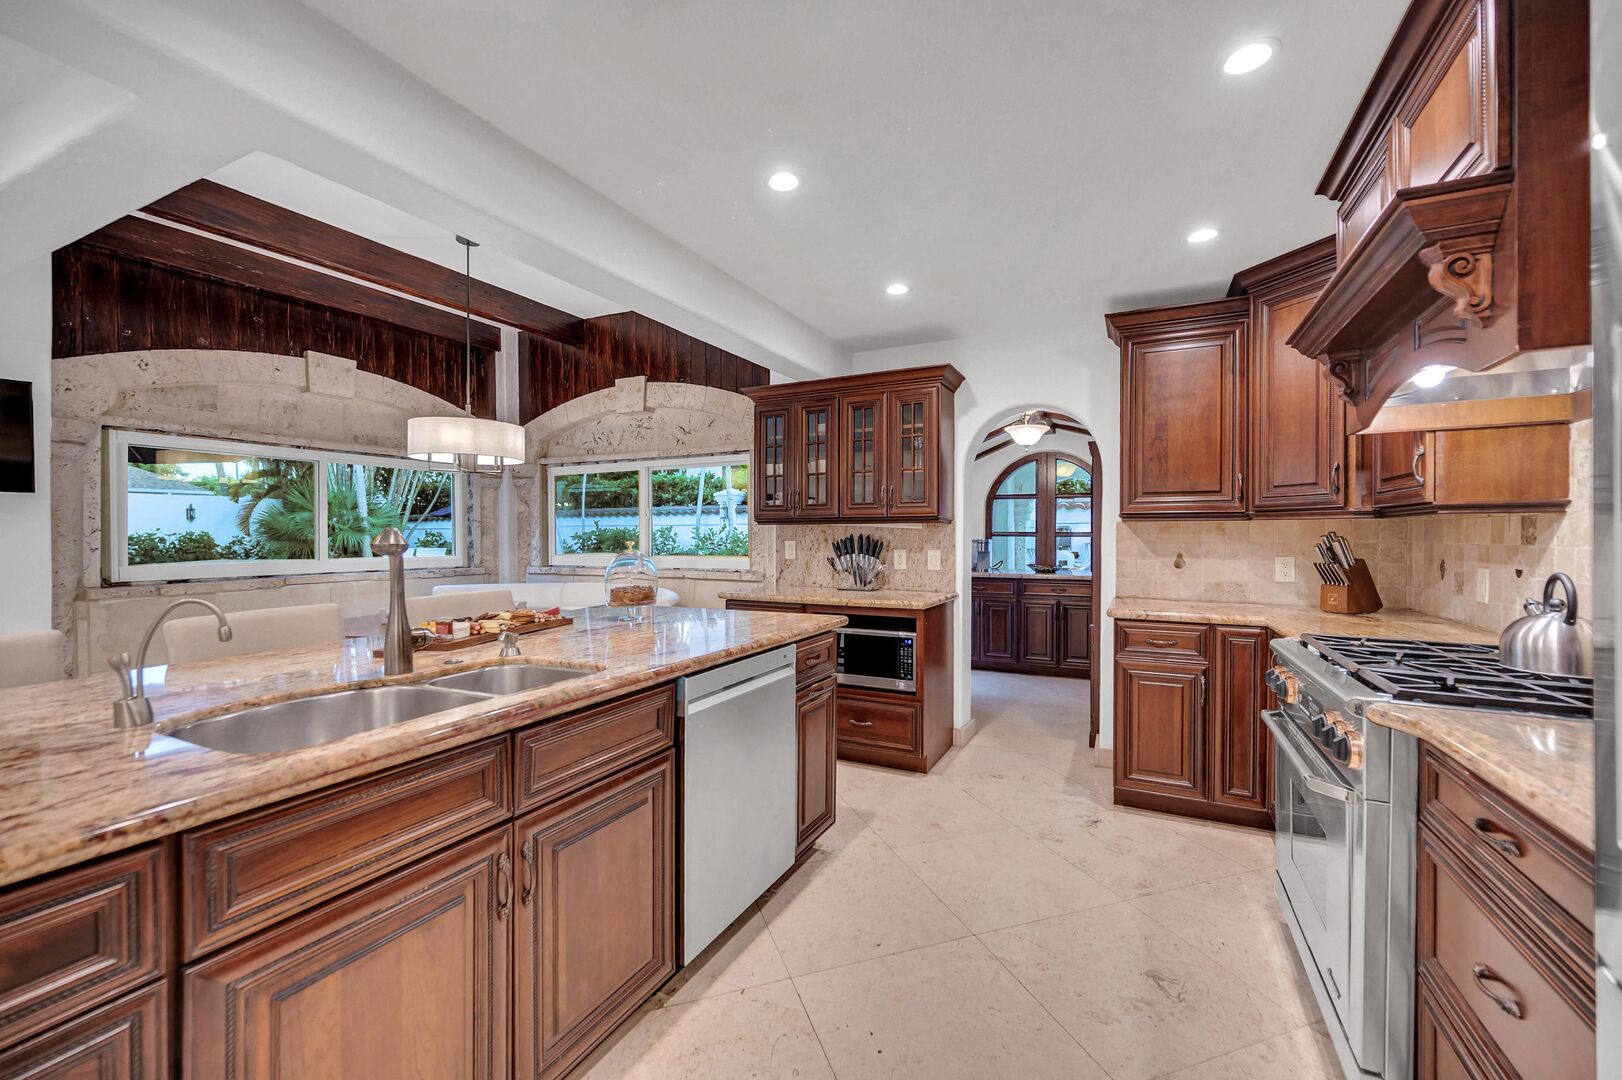 The open gourmet kitchen features bar seating for three and a pantry.